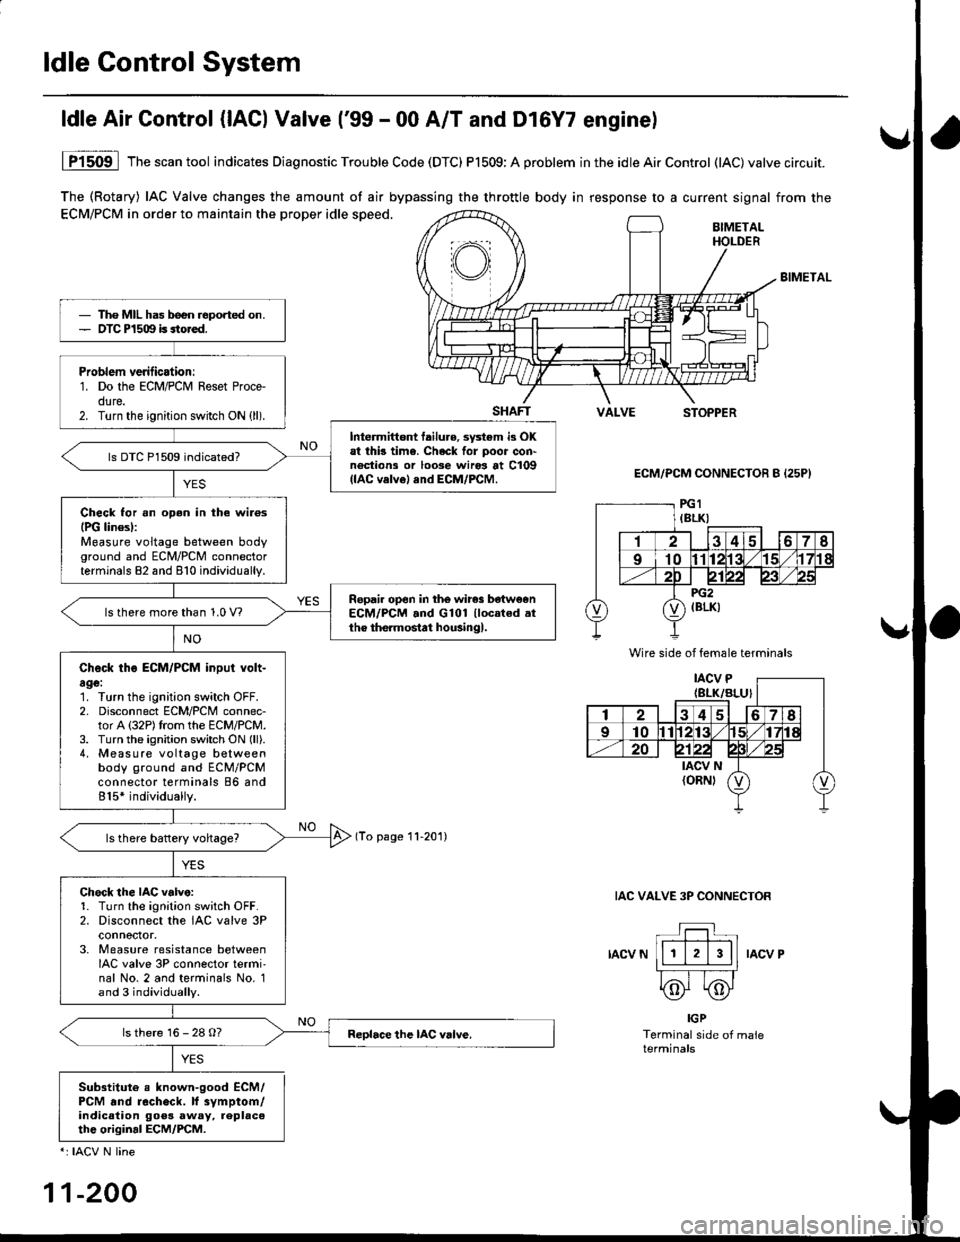 HONDA CIVIC 1998 6.G User Guide ldle Gontrol System
The (Rotary) IAC Valve changes the amount of air bypassing the throttle body in response to a current signal from the
ECM/PCM in order to maintain the proper idle speed.BIMETALHOLD